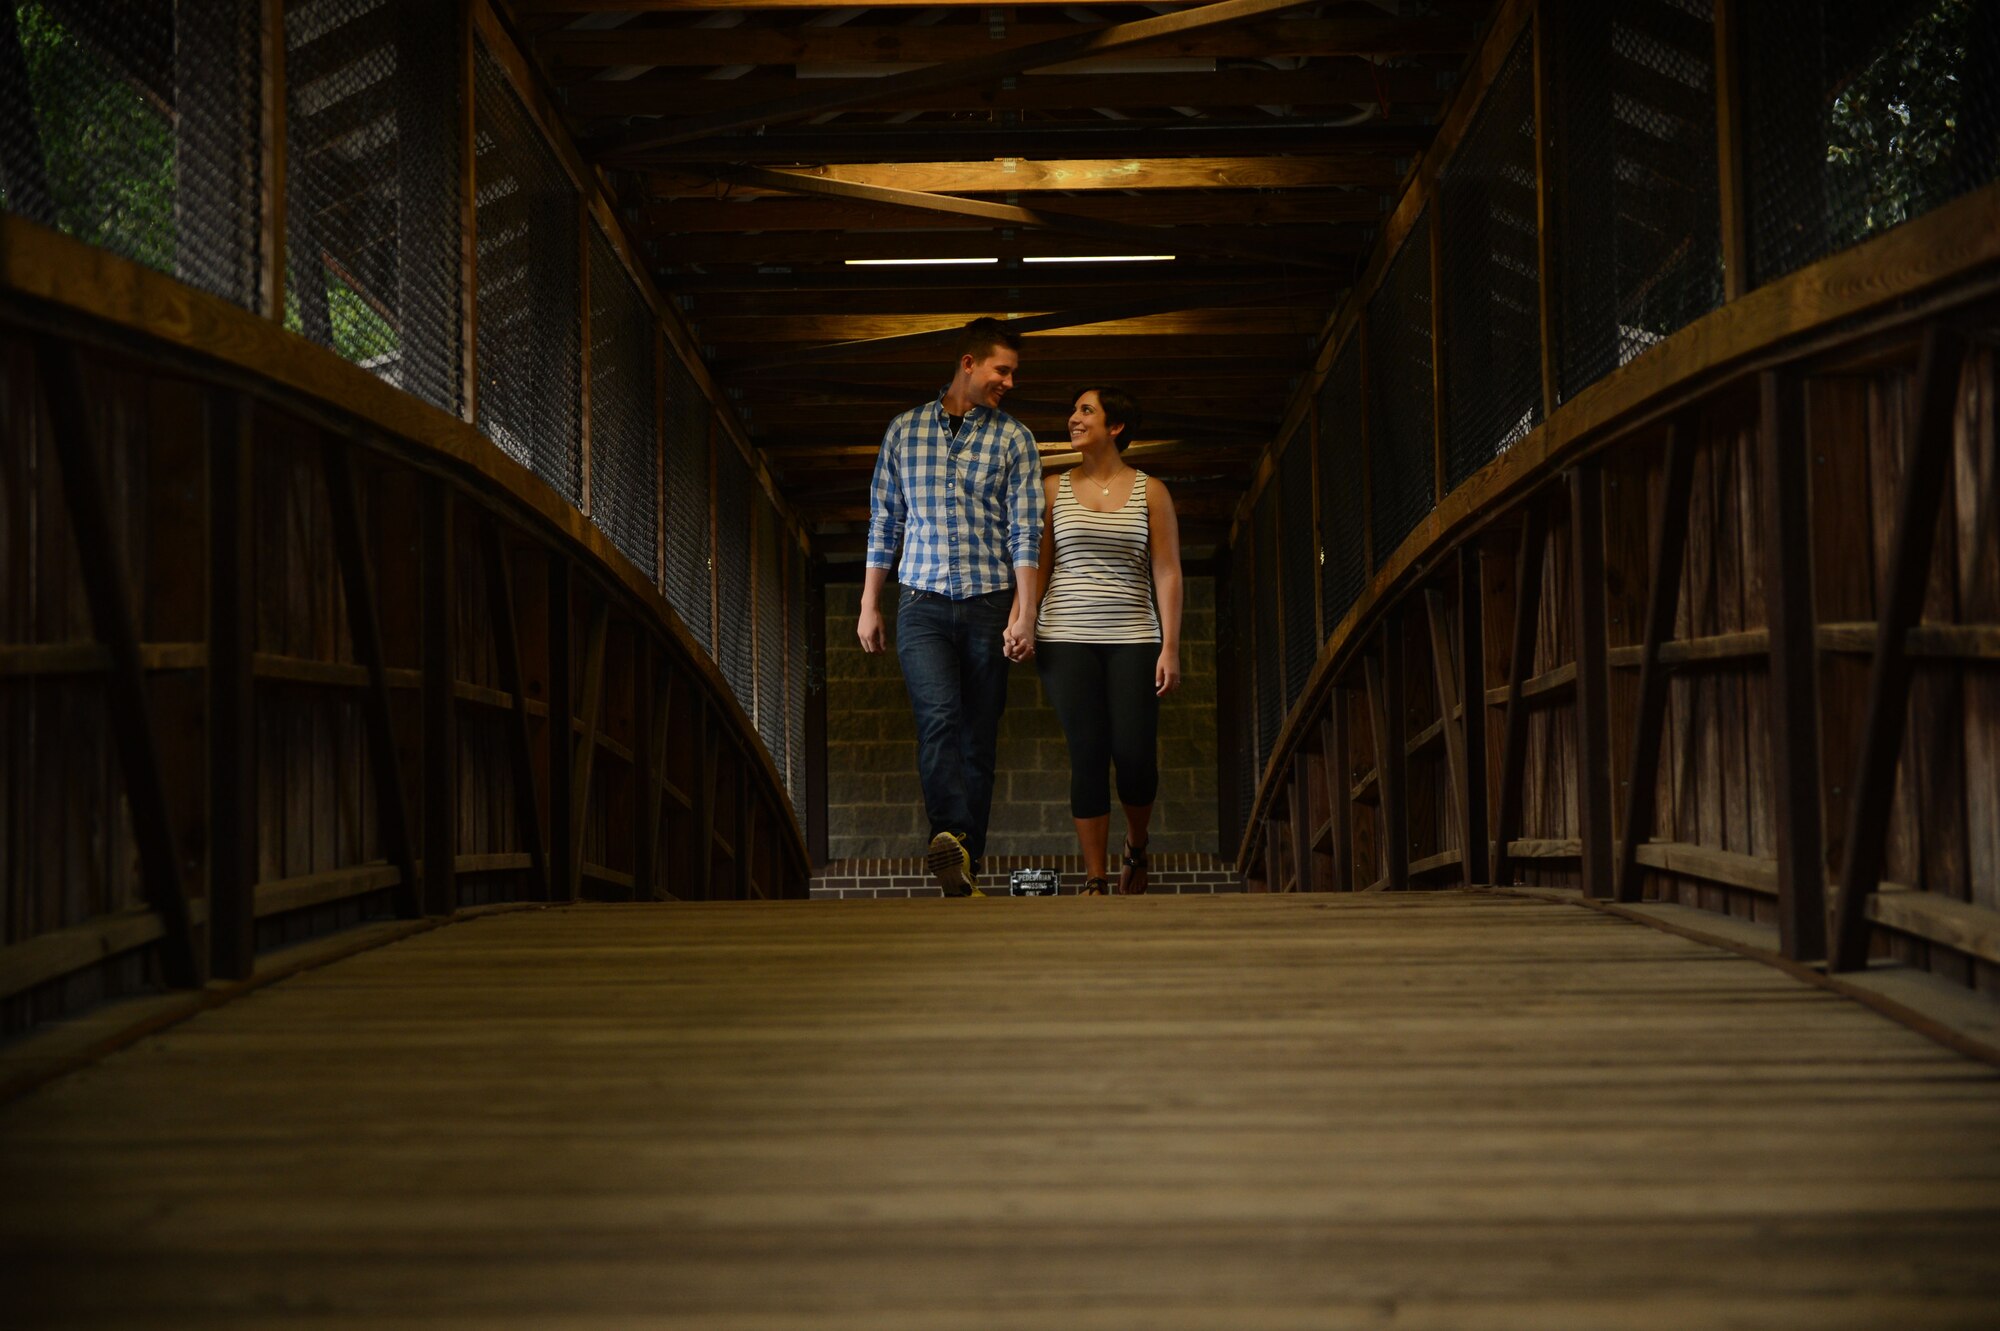 U.S. Air Force Airmen 1st Class, Michael and Diana Cossaboom, 20th Fighter Wing Public Affairs photojournalists, walk across a bridge at Swan Lake and Iris Gardens near Shaw Air Force Base, S.C., July 19, 2014. The Cossabooms participated in a six week marriage mentorship program created by Chaplain (Maj.) Richard Holmes, 20th FW interim deputy wing chaplain, which helped the two learn about their “love languages”. (U.S. Air Force photo by Airman 1st Class Jensen Stidham/Released)